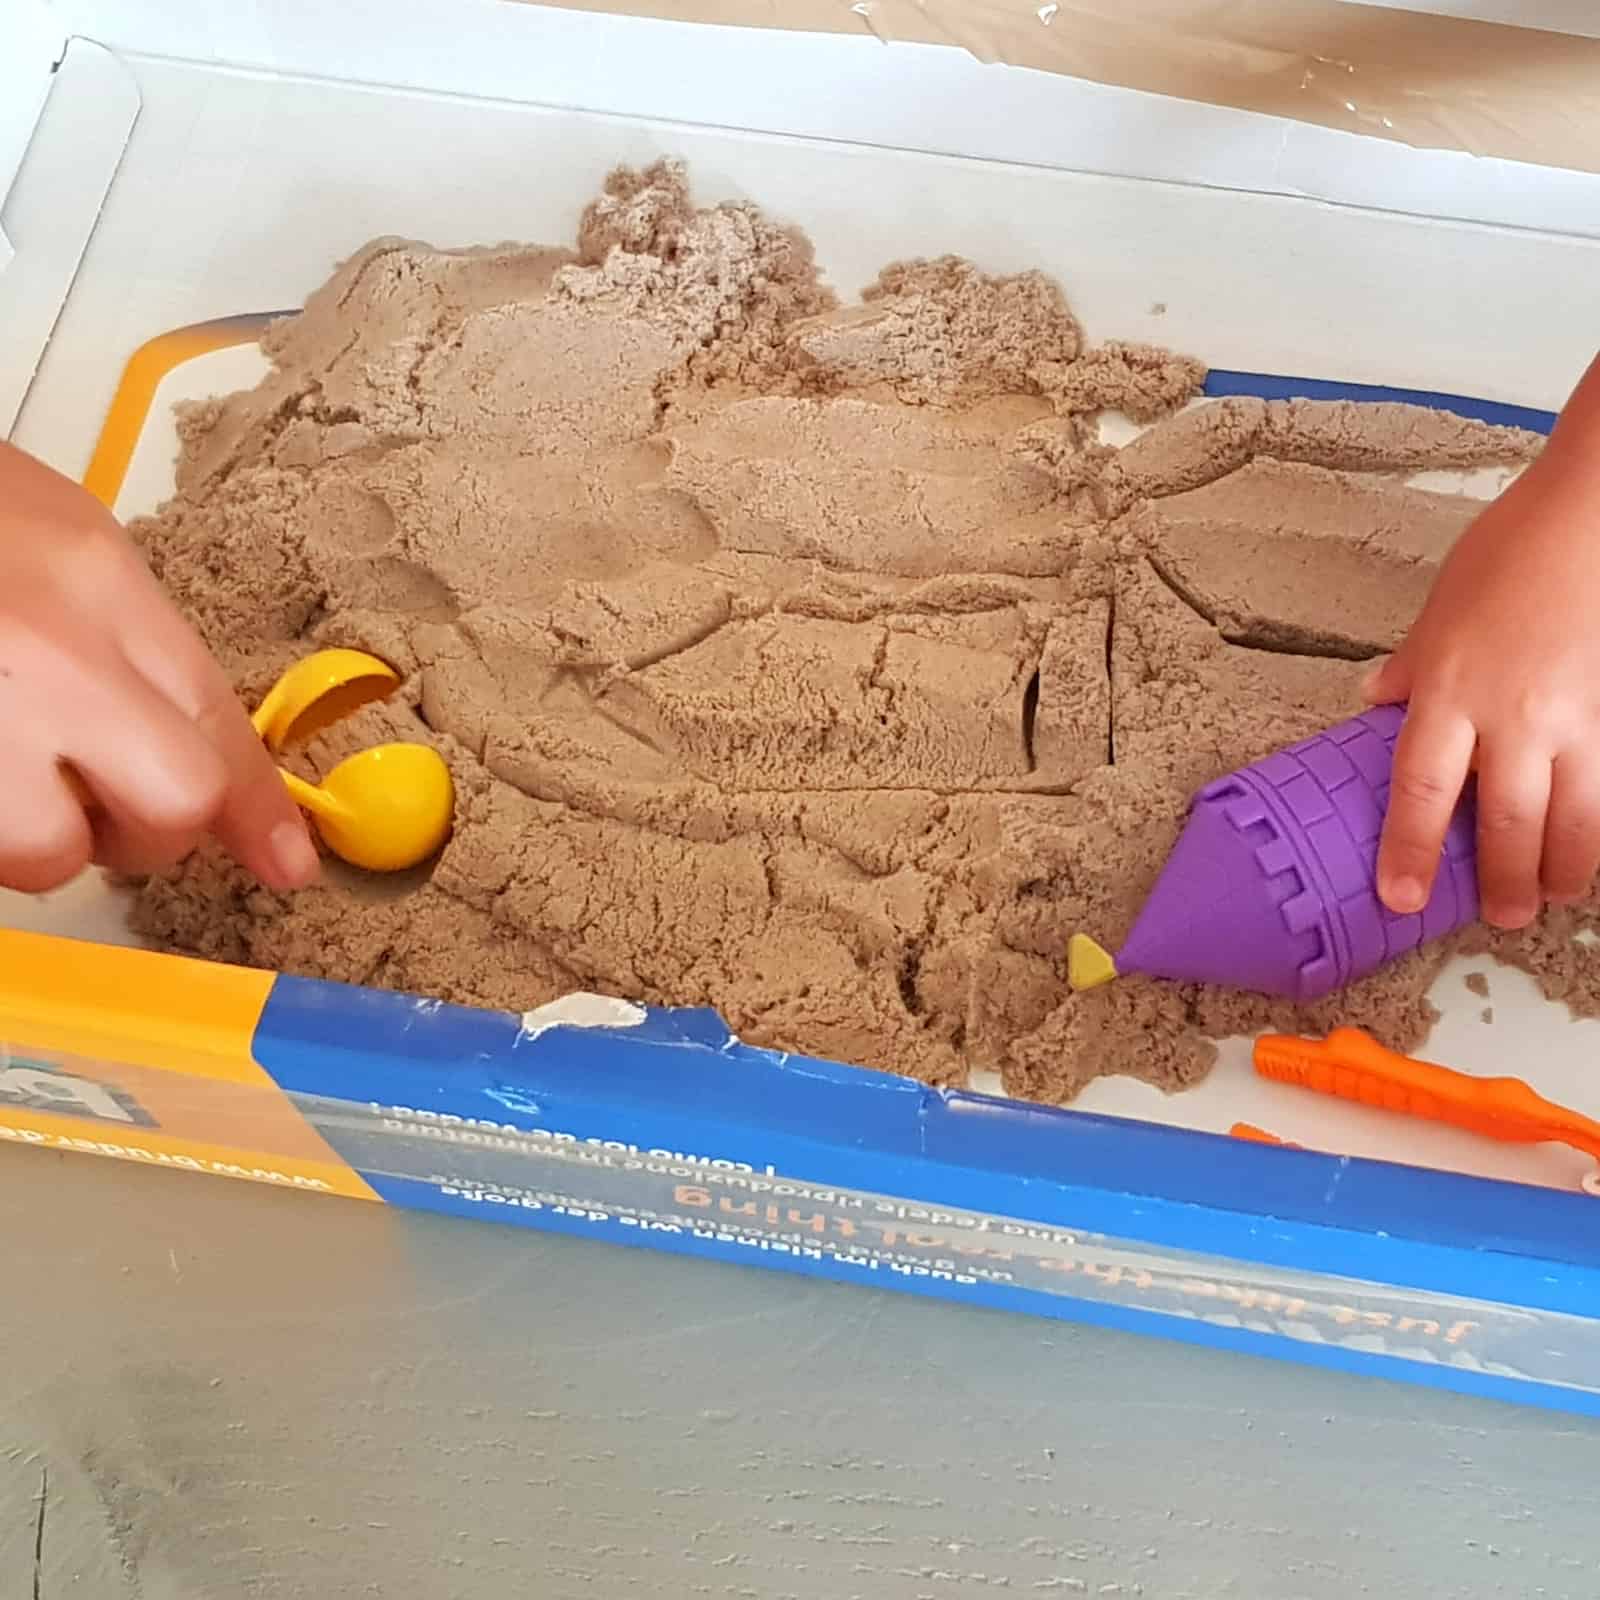 DIY kinetic sand play area from a box